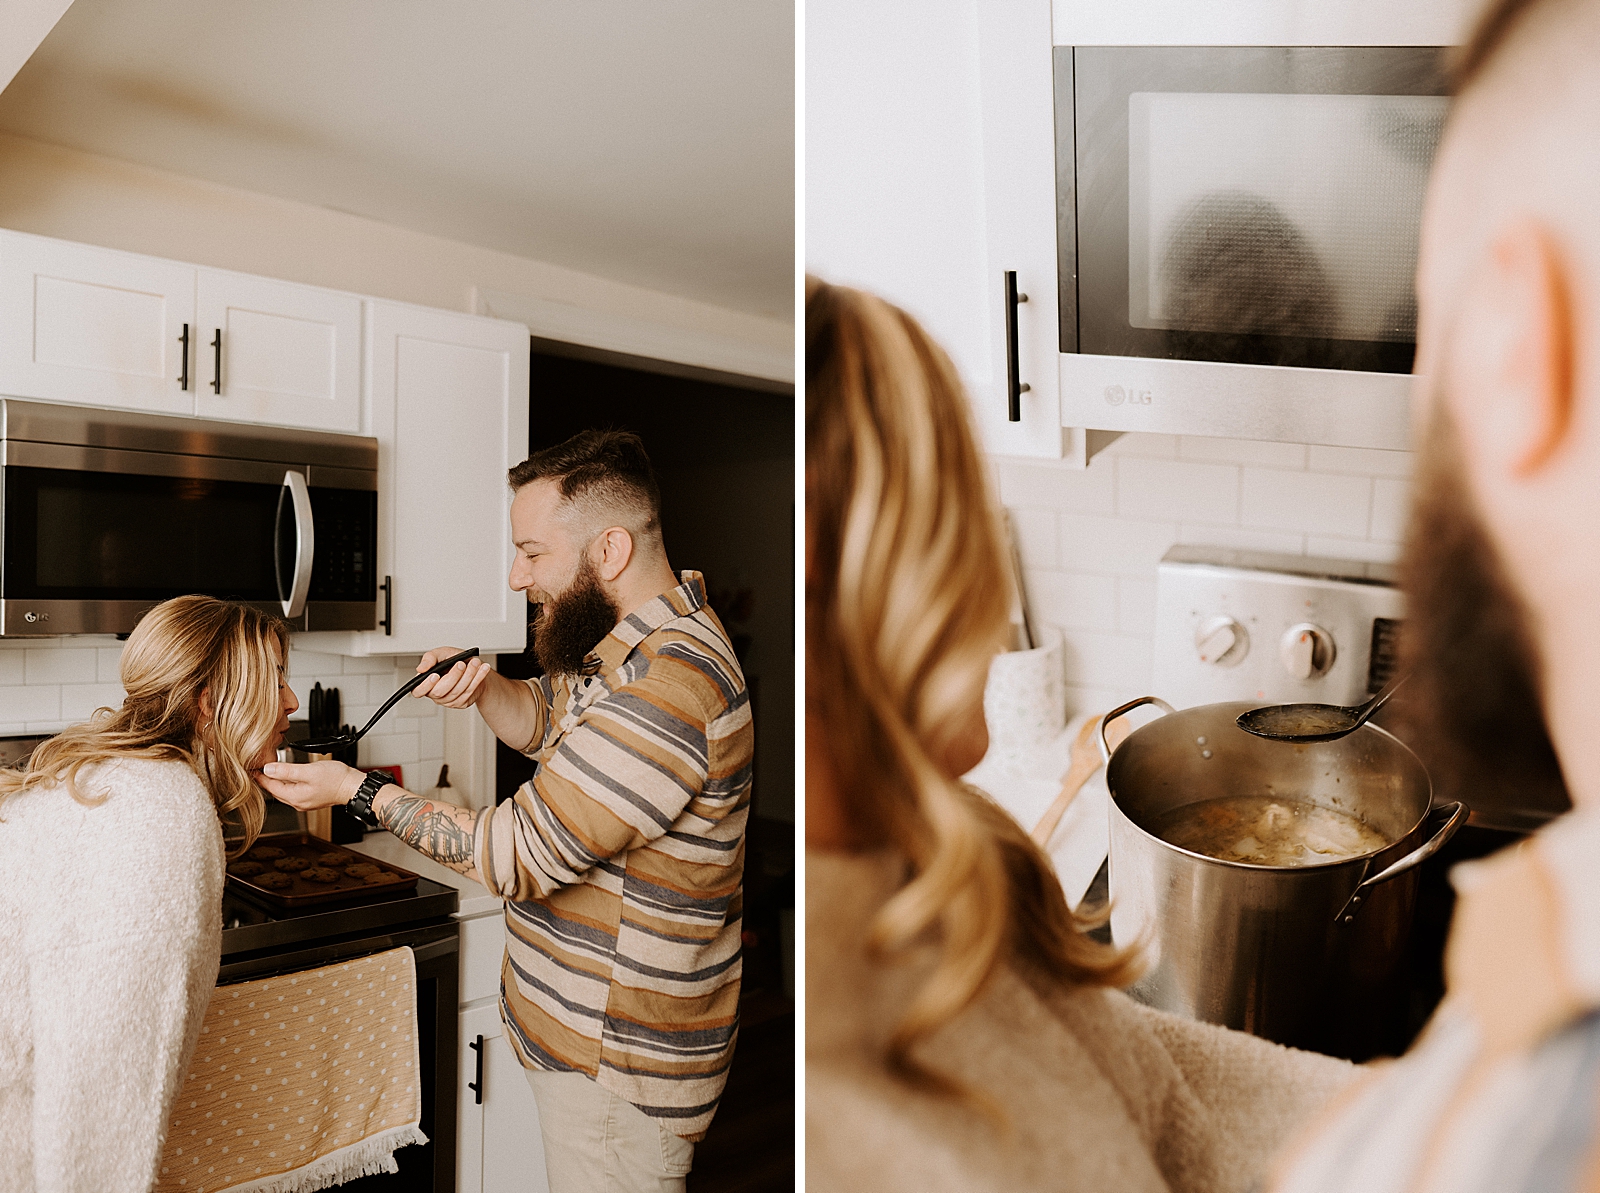 Man letting woman taste soup from laddle cooking